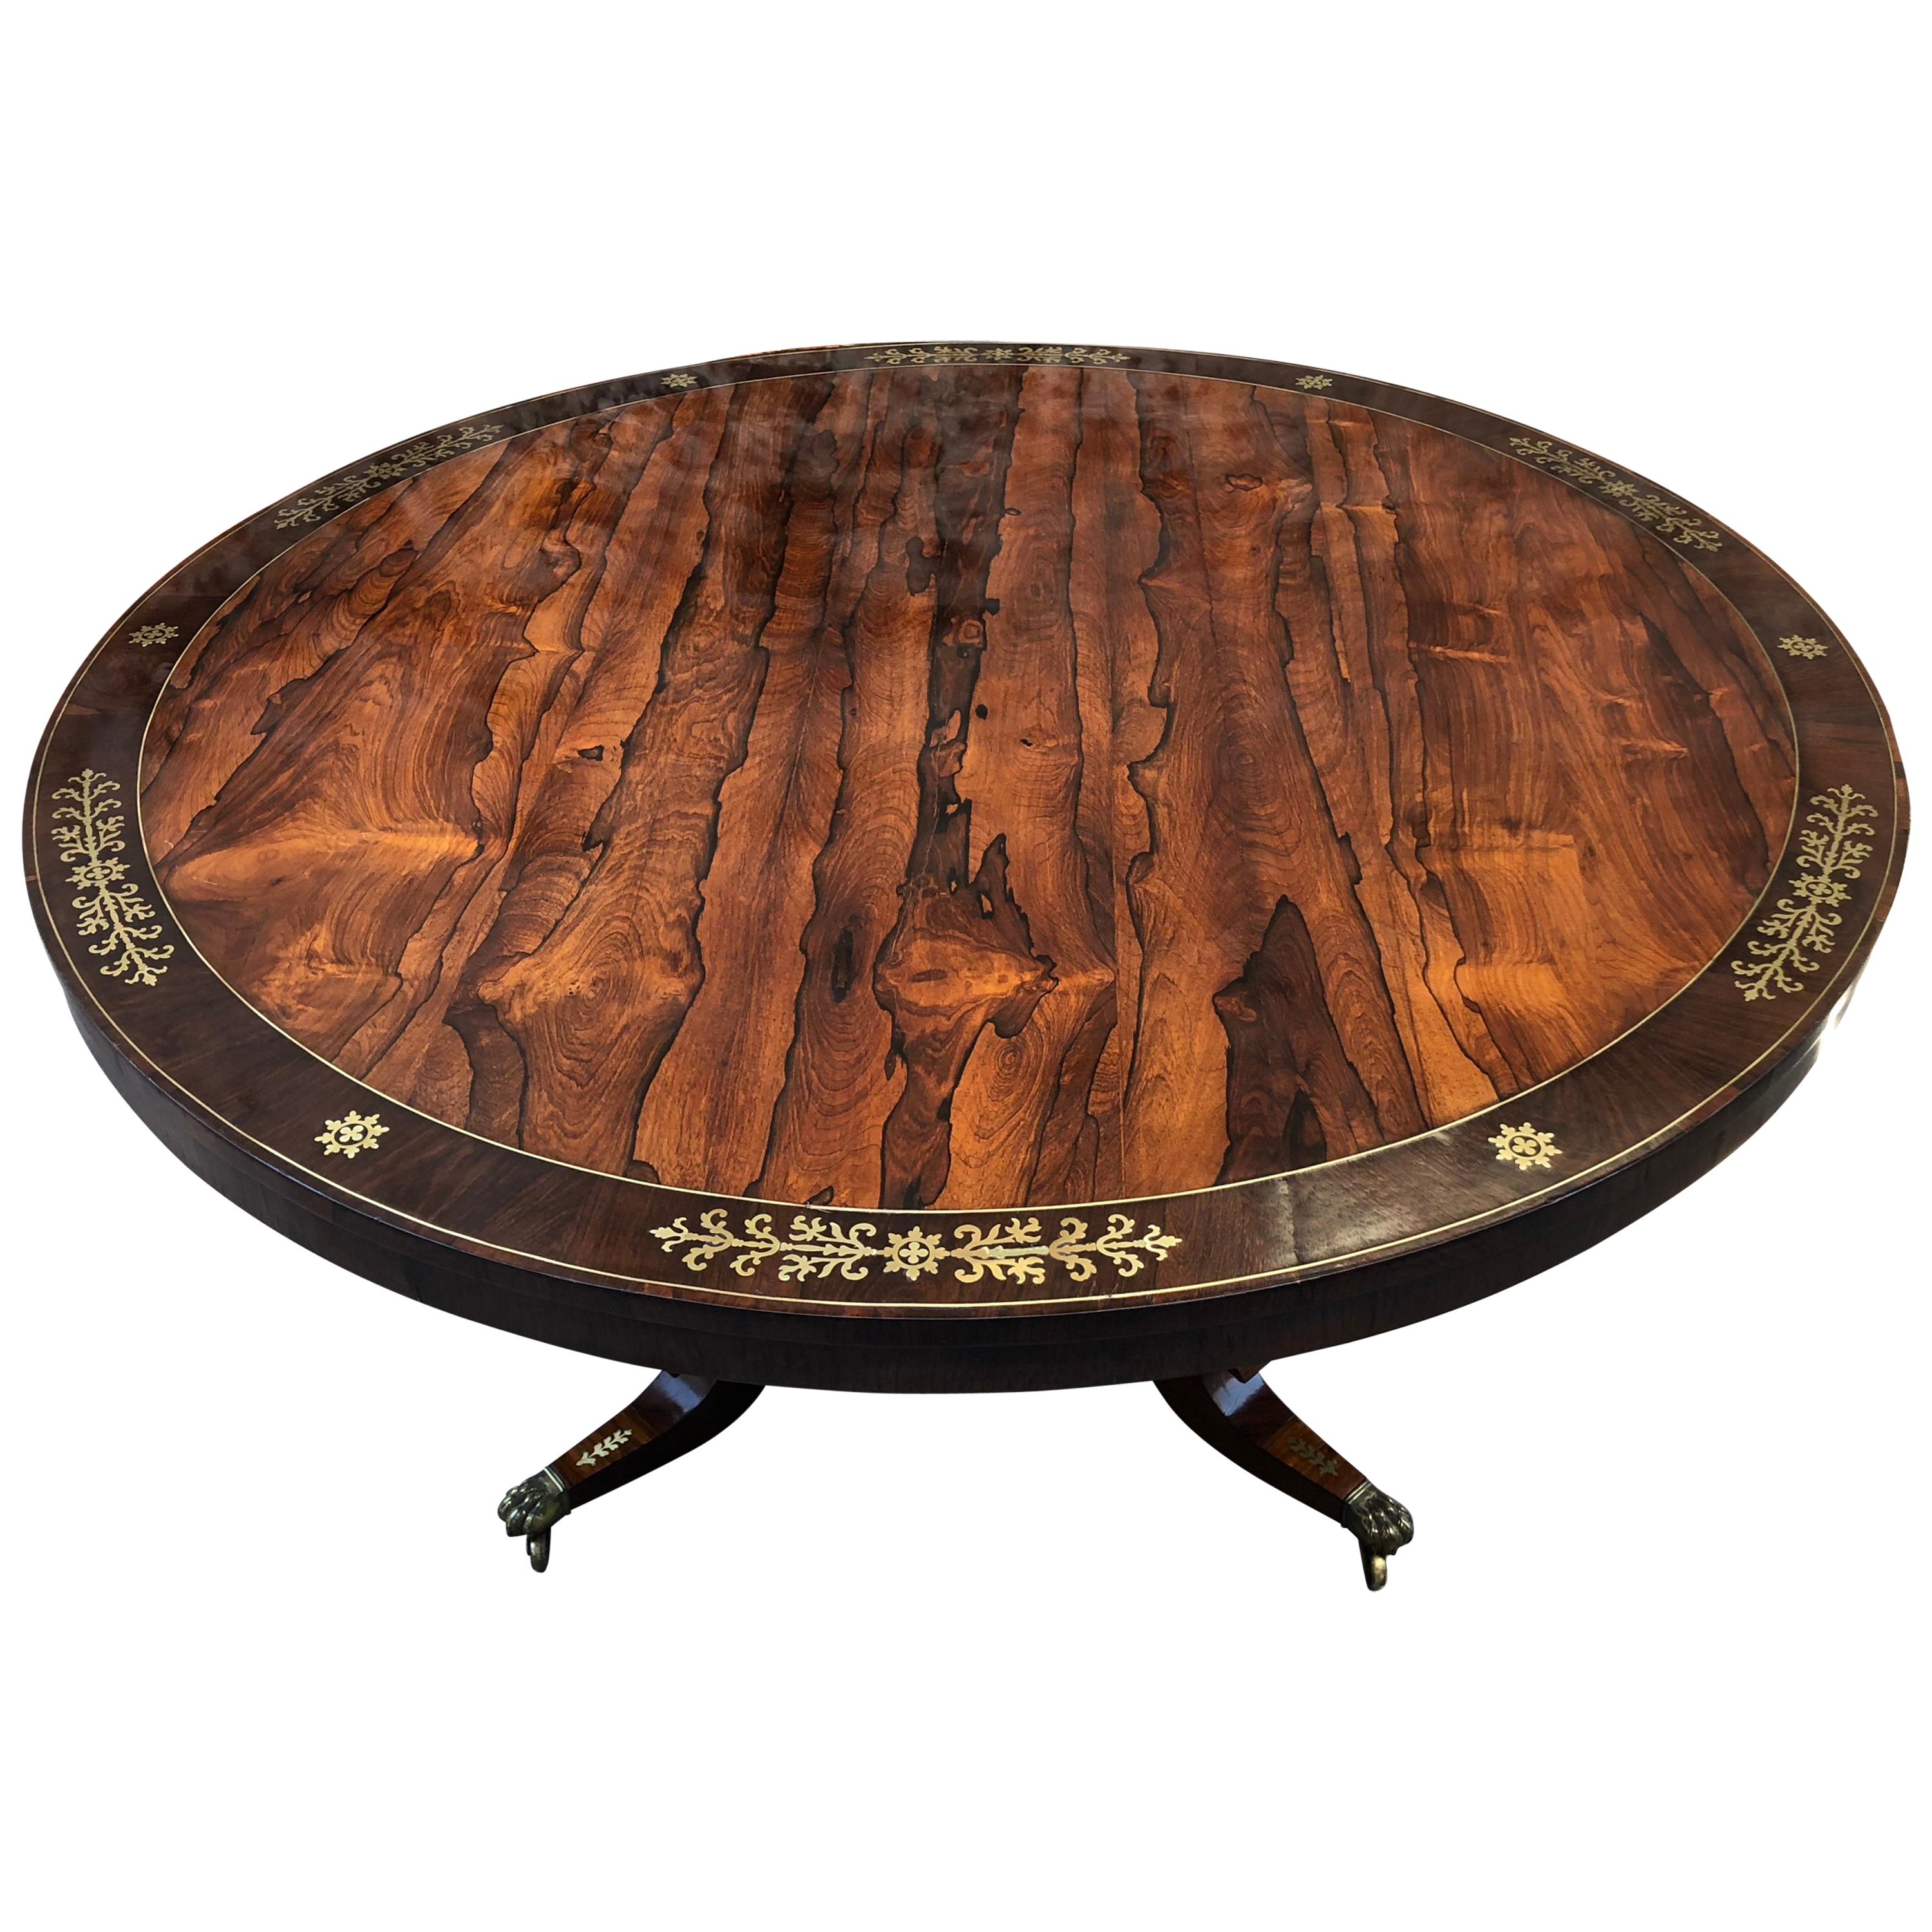 English Brass Inlaid Rosewood Center or Dining Table, circa 1830